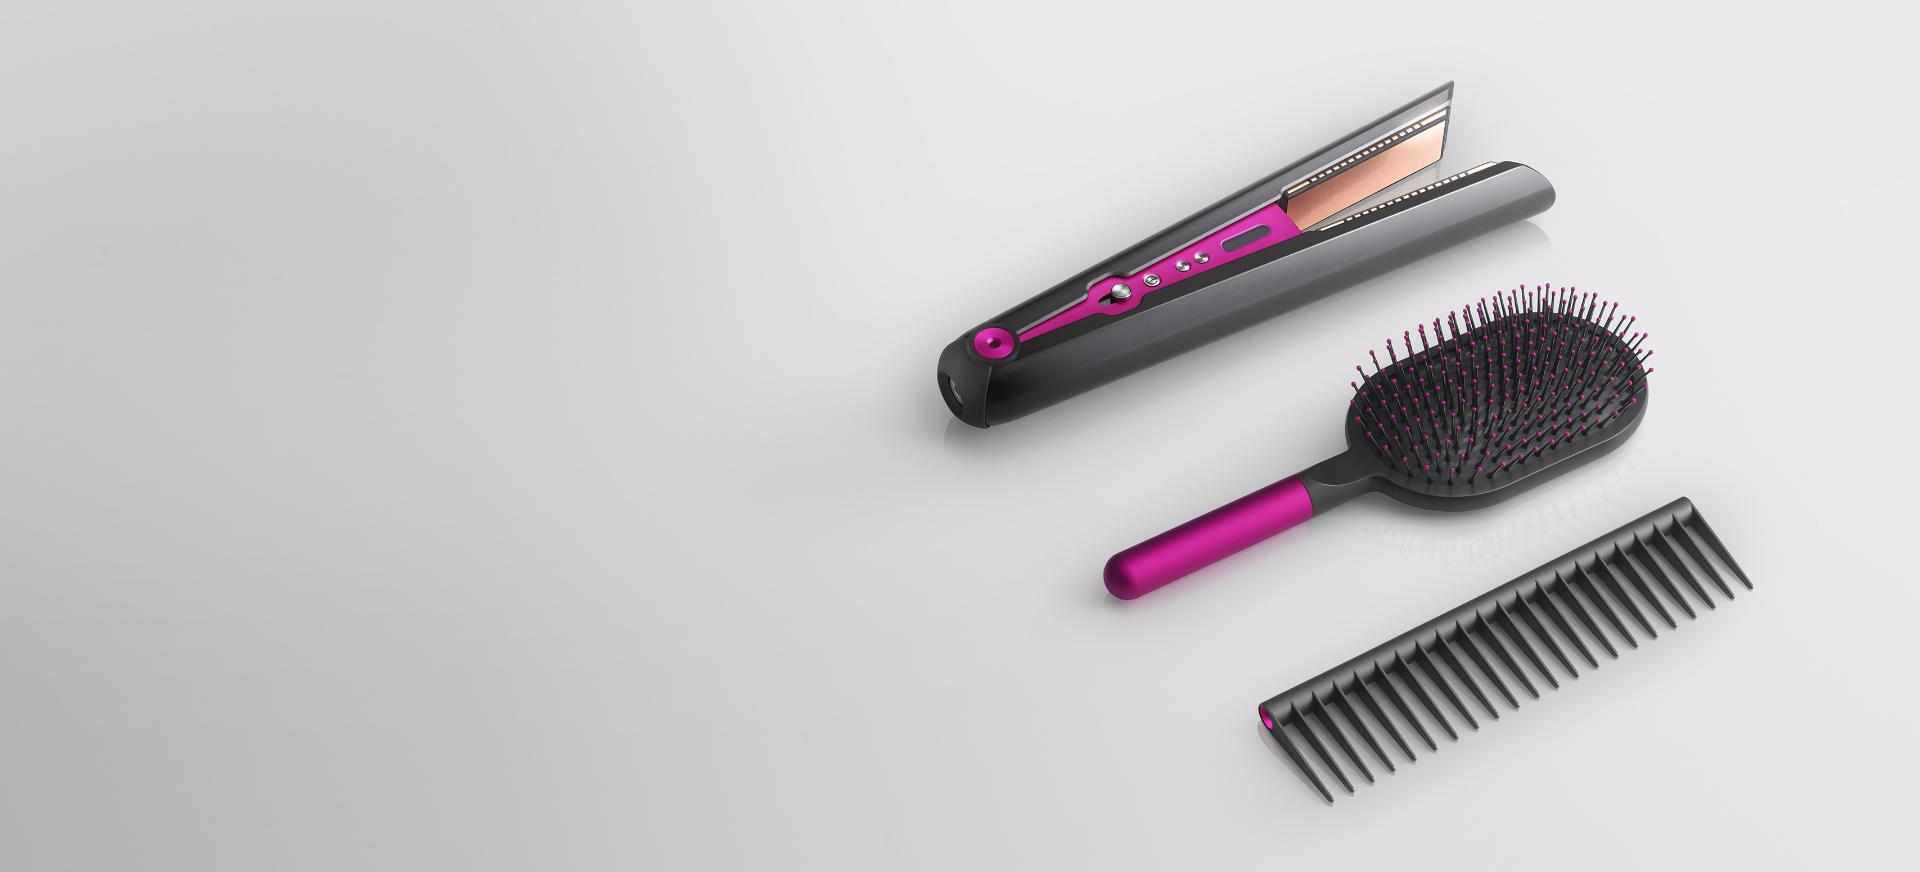 Dyson Corrale straightener with Paddle brush and Detangling comb